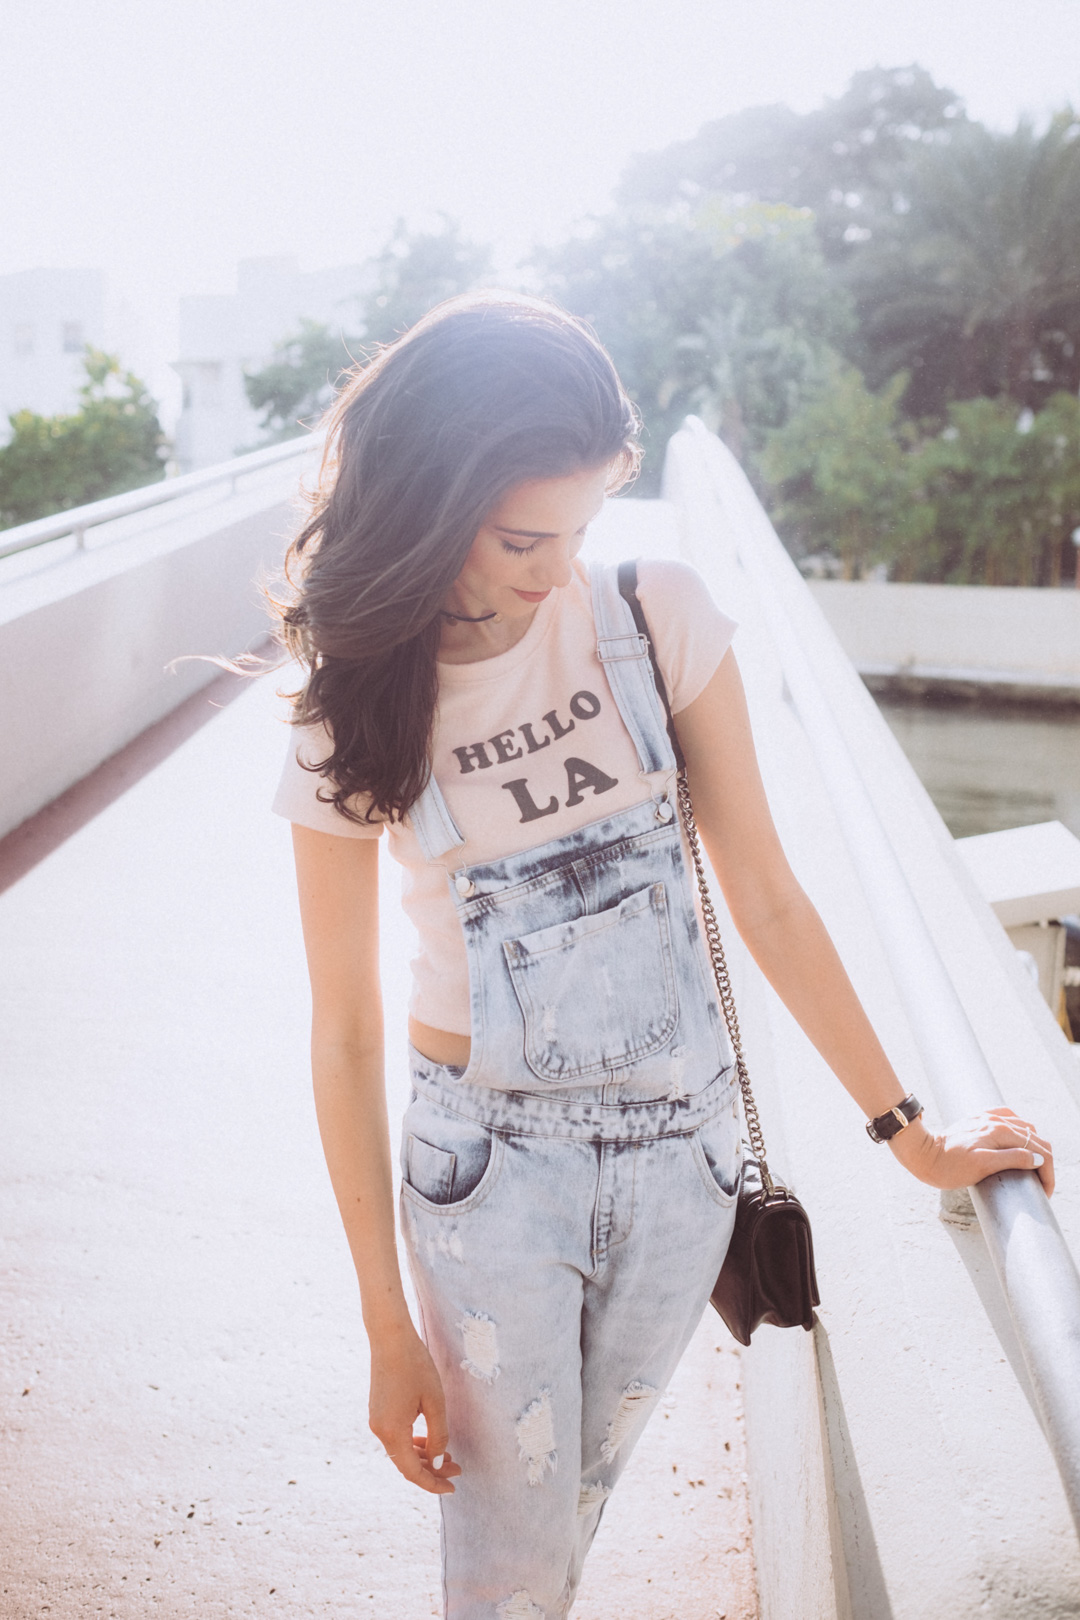 Dash of panache wearing Forever 21 Overalls and Hello LA Tee